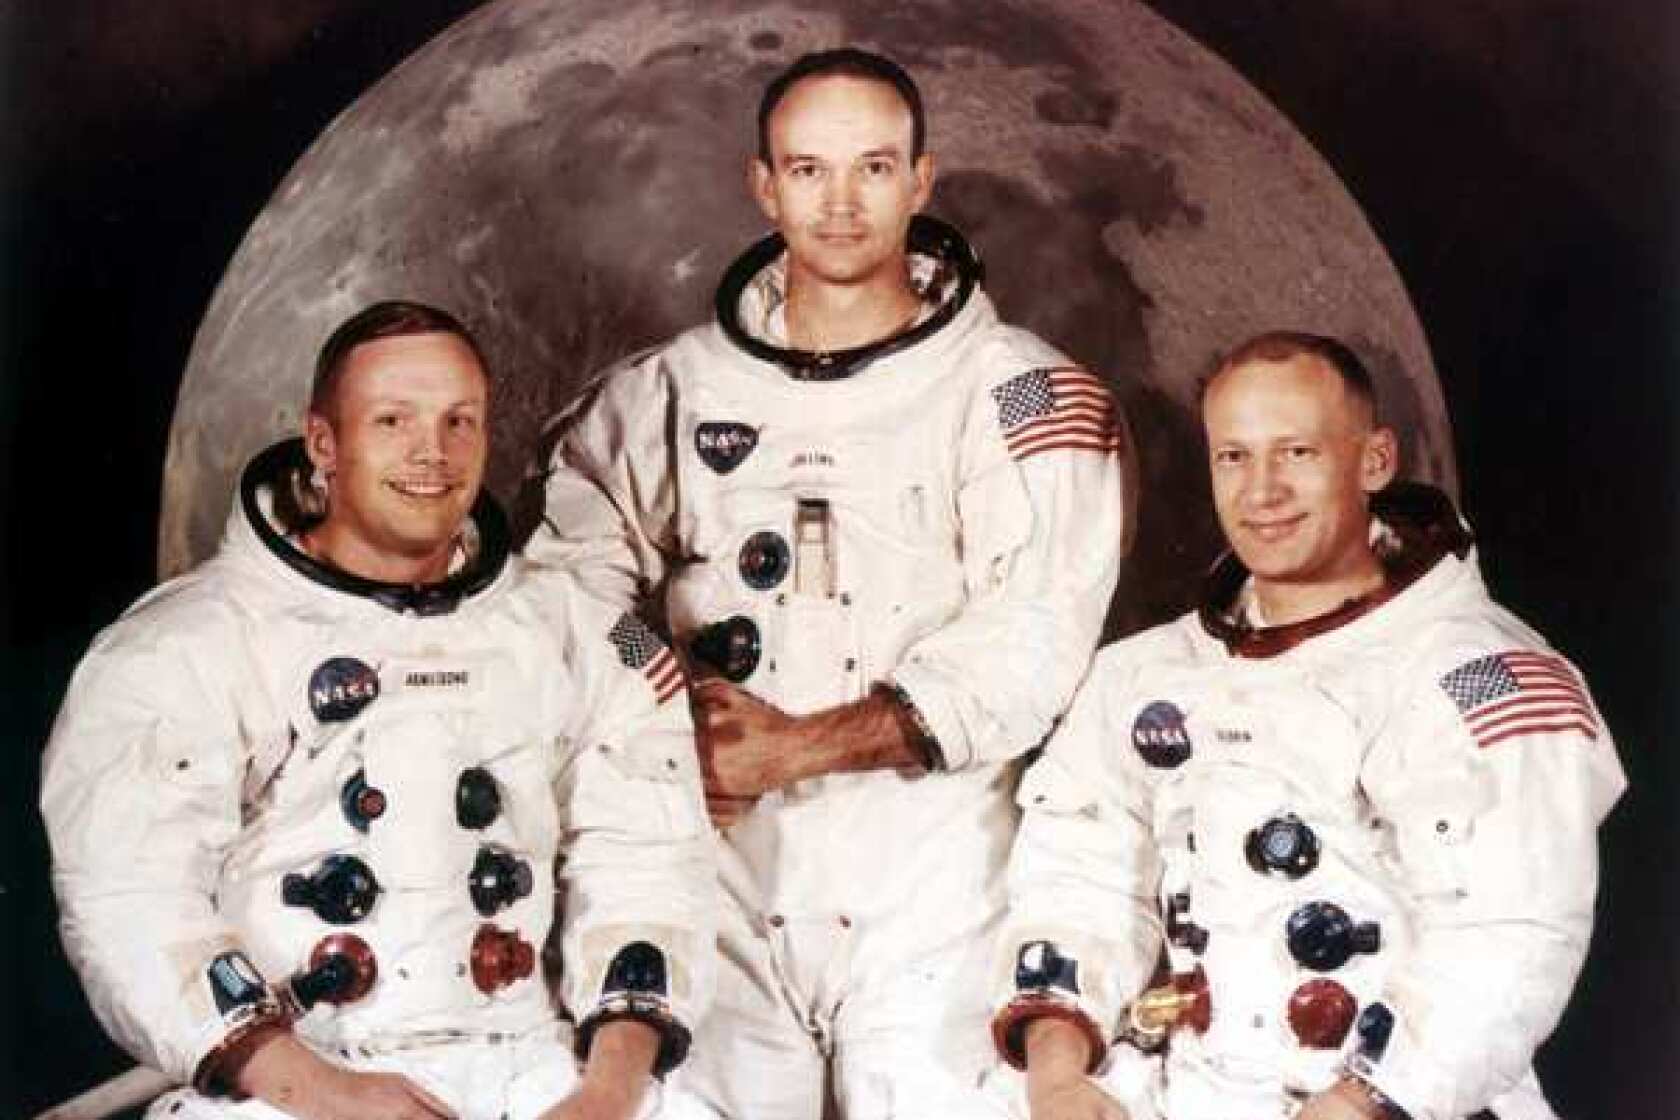 Neil Armstrong, first person to walk on moon, dies at 82 - Los Angeles Times